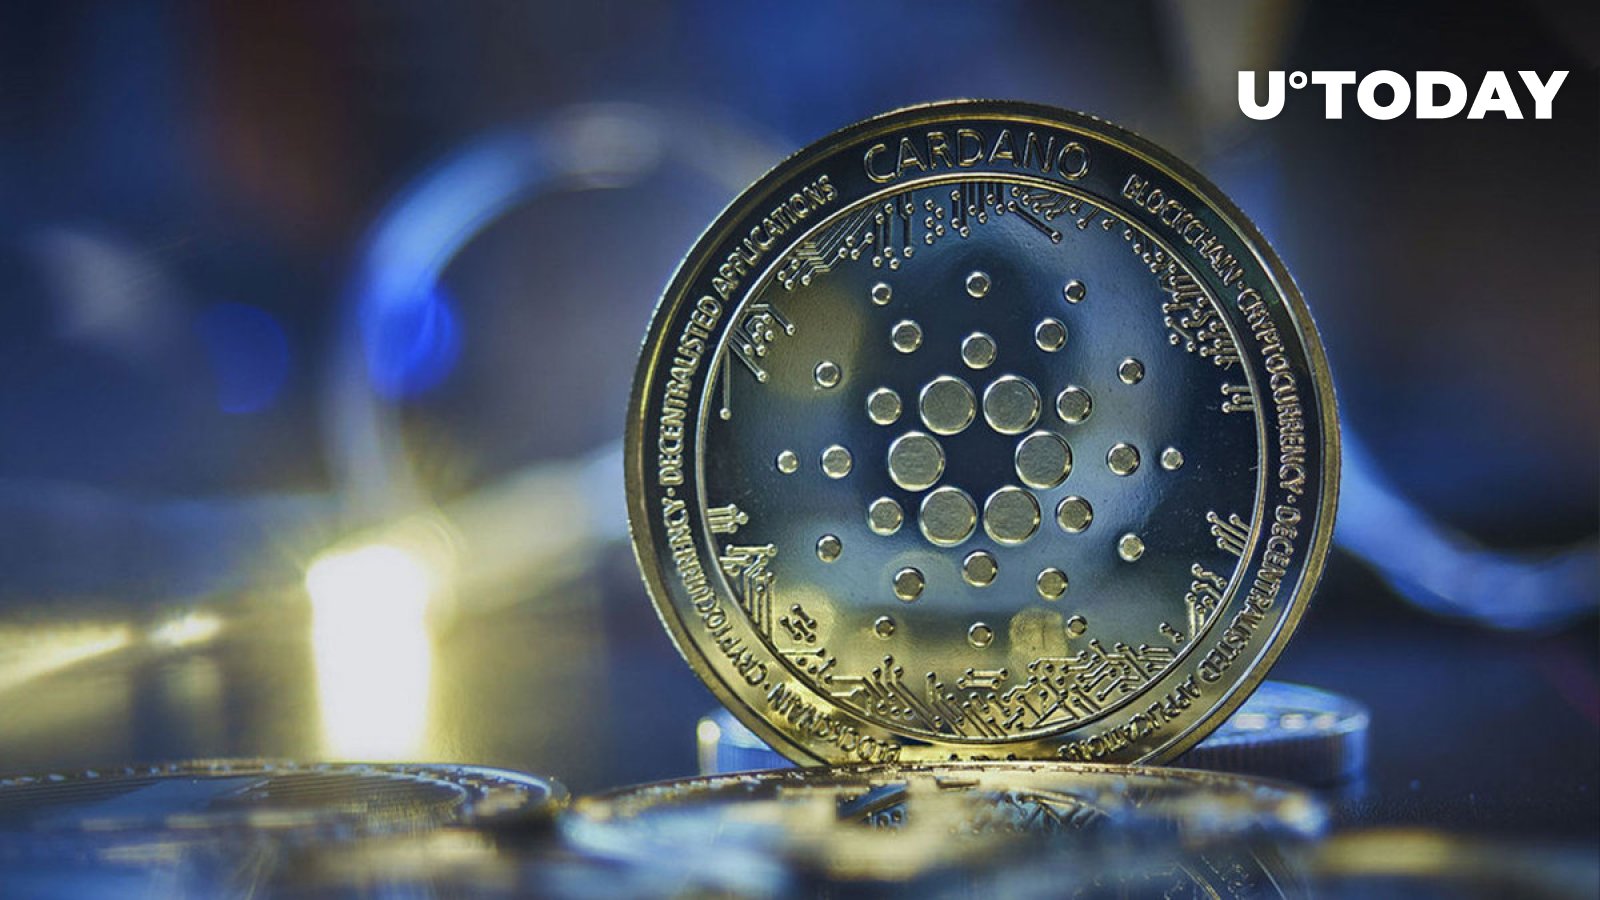 Cardano (ADA) Price Growth Lags, Here's What Can Drive Short-Term Growth - BitcoinEthereumNews.com